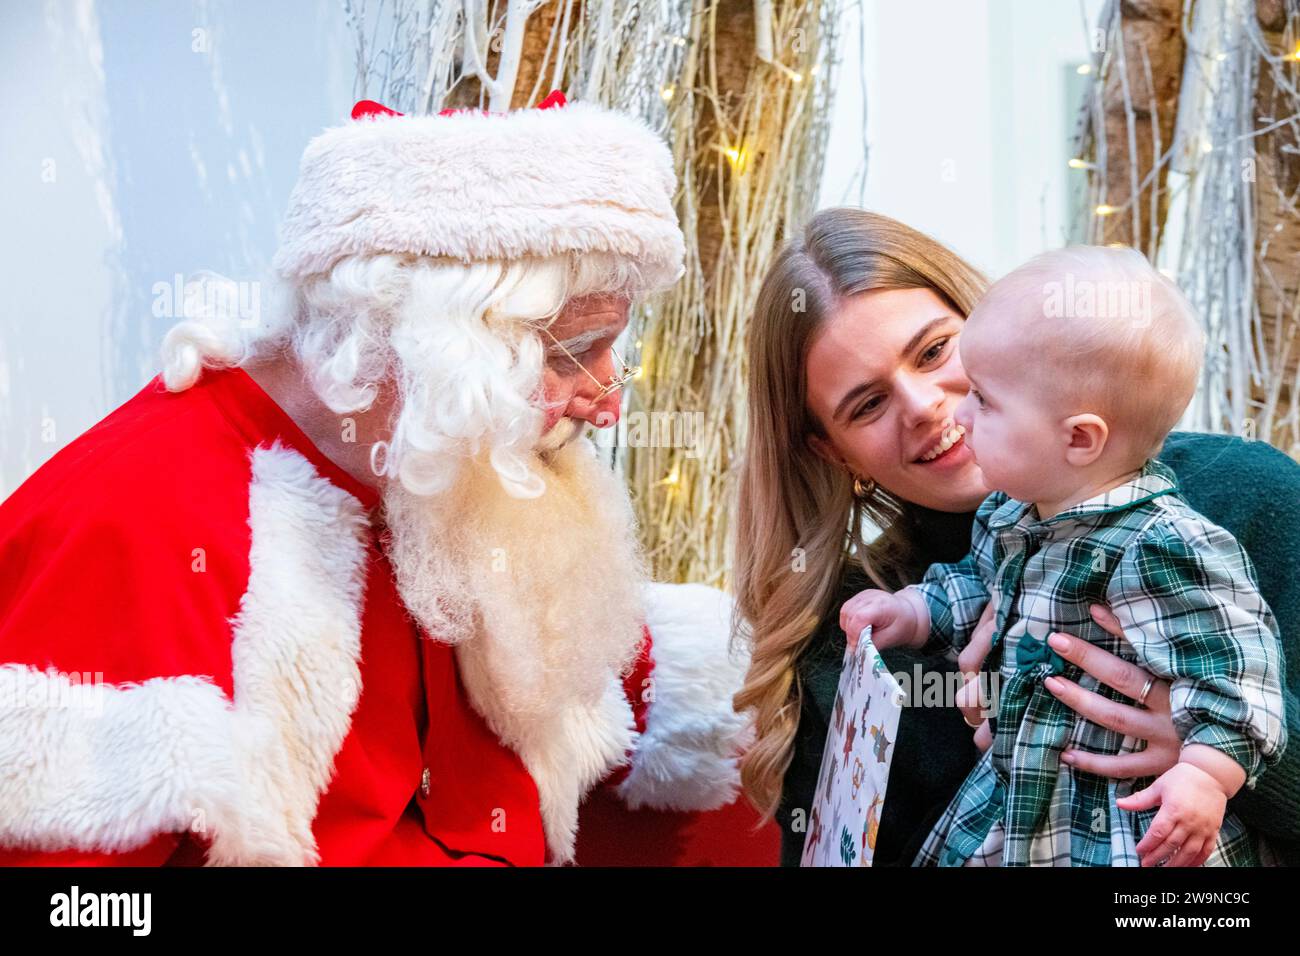 A mother and her daughter meet Santa Claus at Christmas time Stock Photo